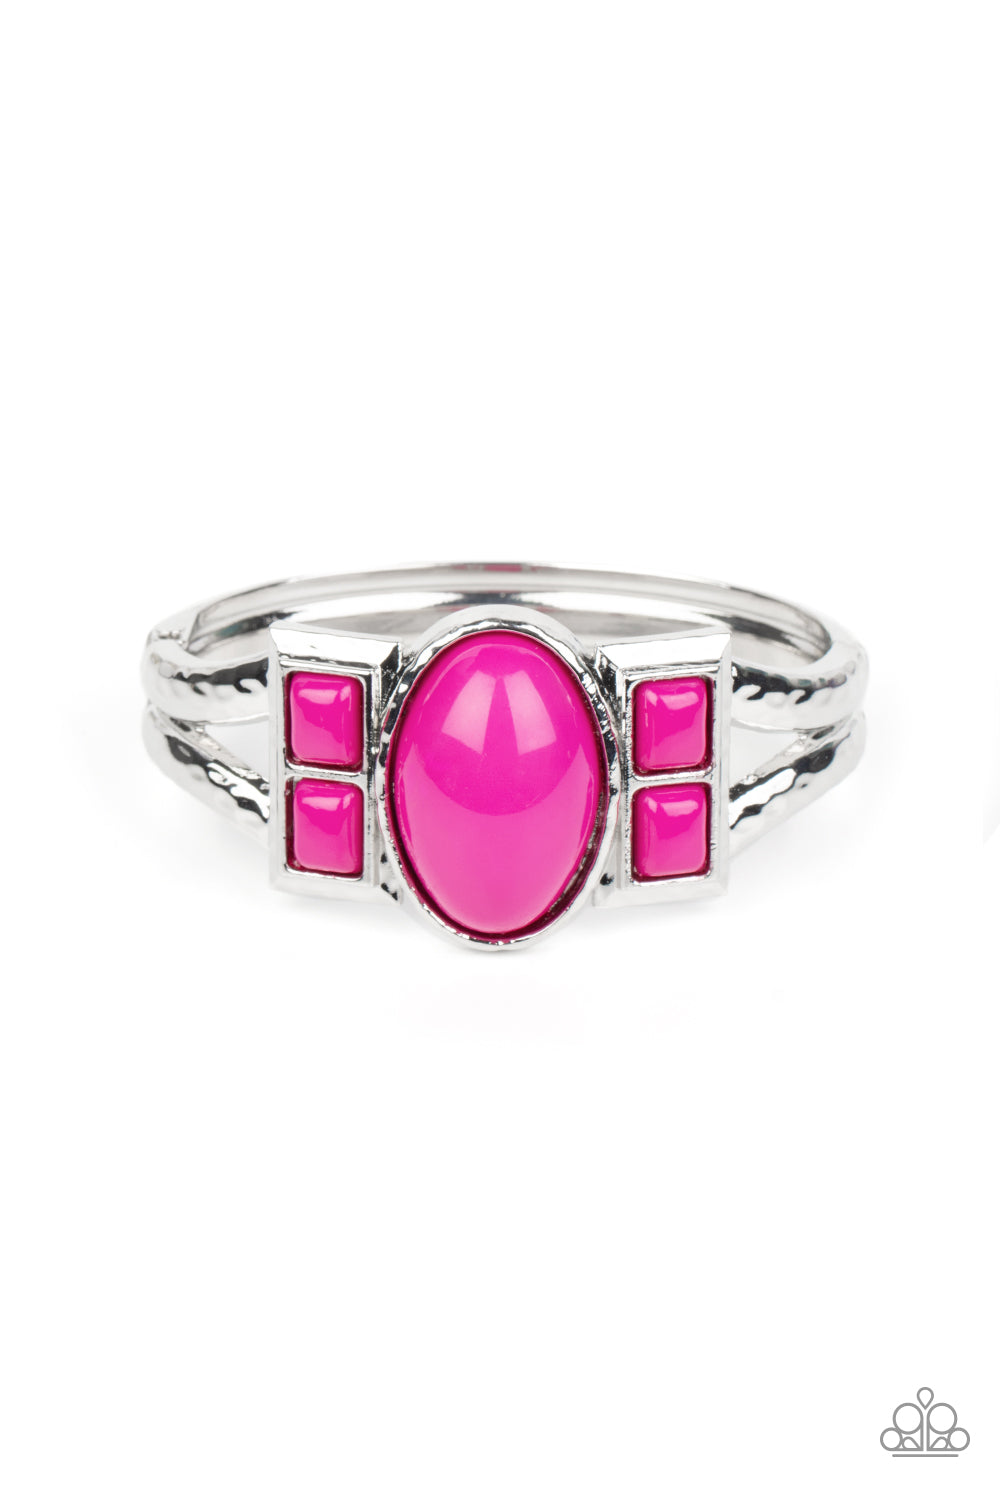 A Touch of Tiki - Pink and Silver Hinged Bracelet - Paparazzi Accessories